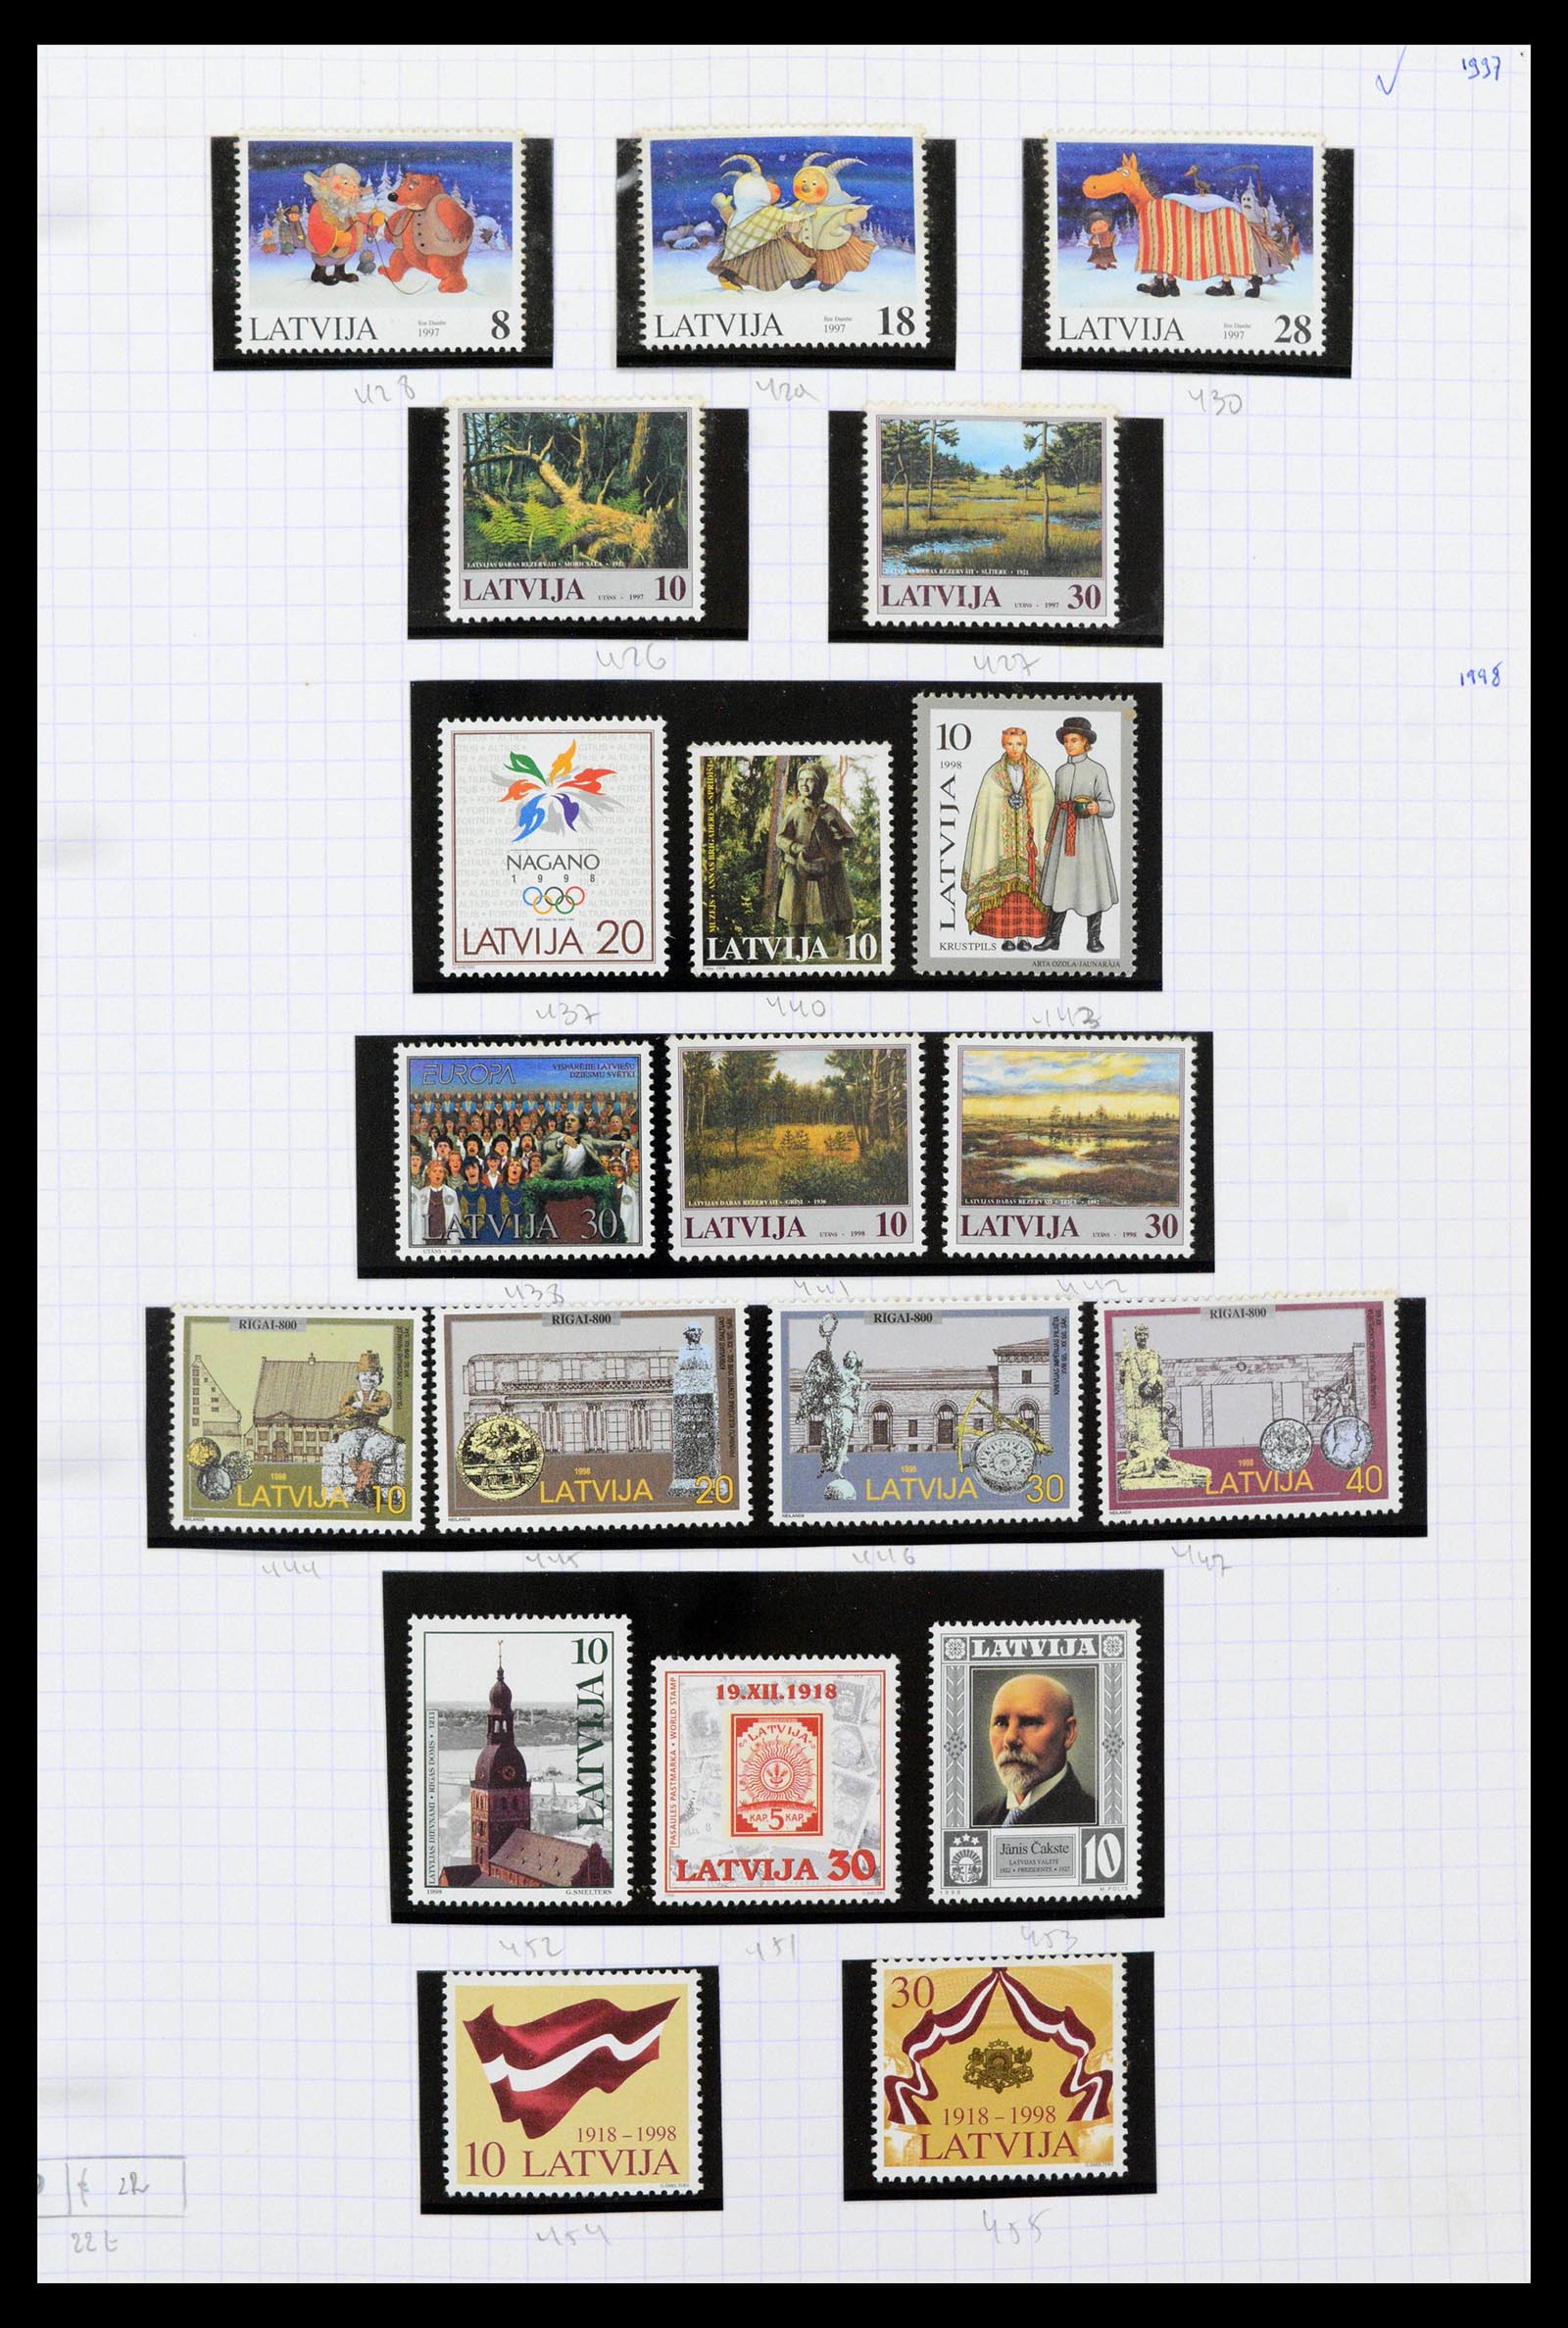 39238 0043 - Stamp collection 39238 Latvia 1919-2008.